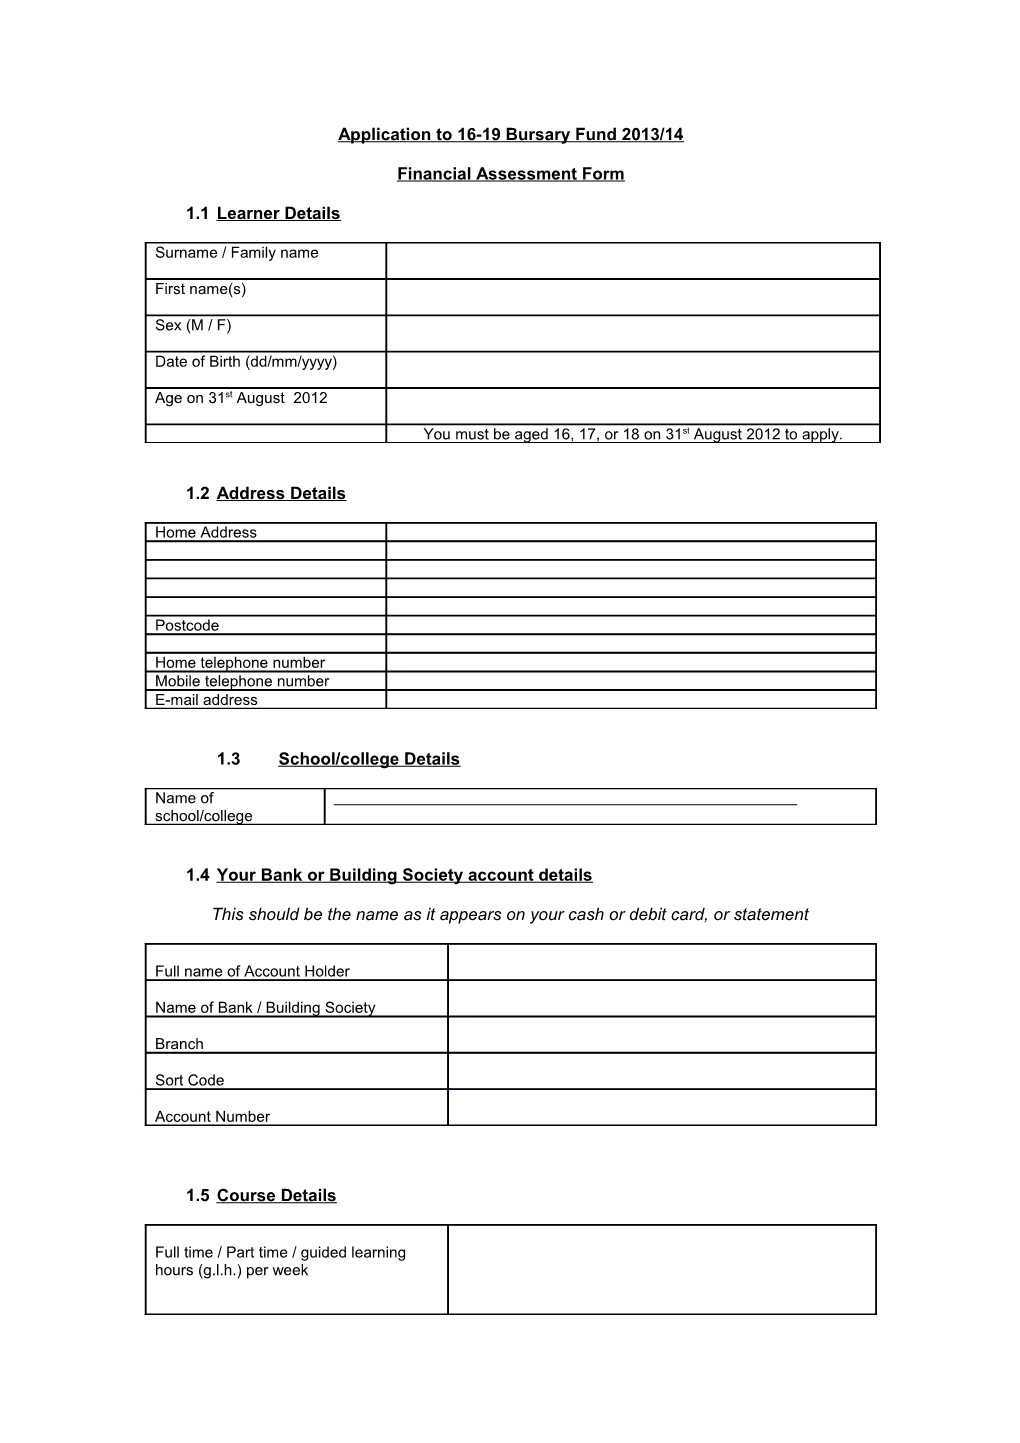 Proposed Application Form for Learner Support Fund 2011/12